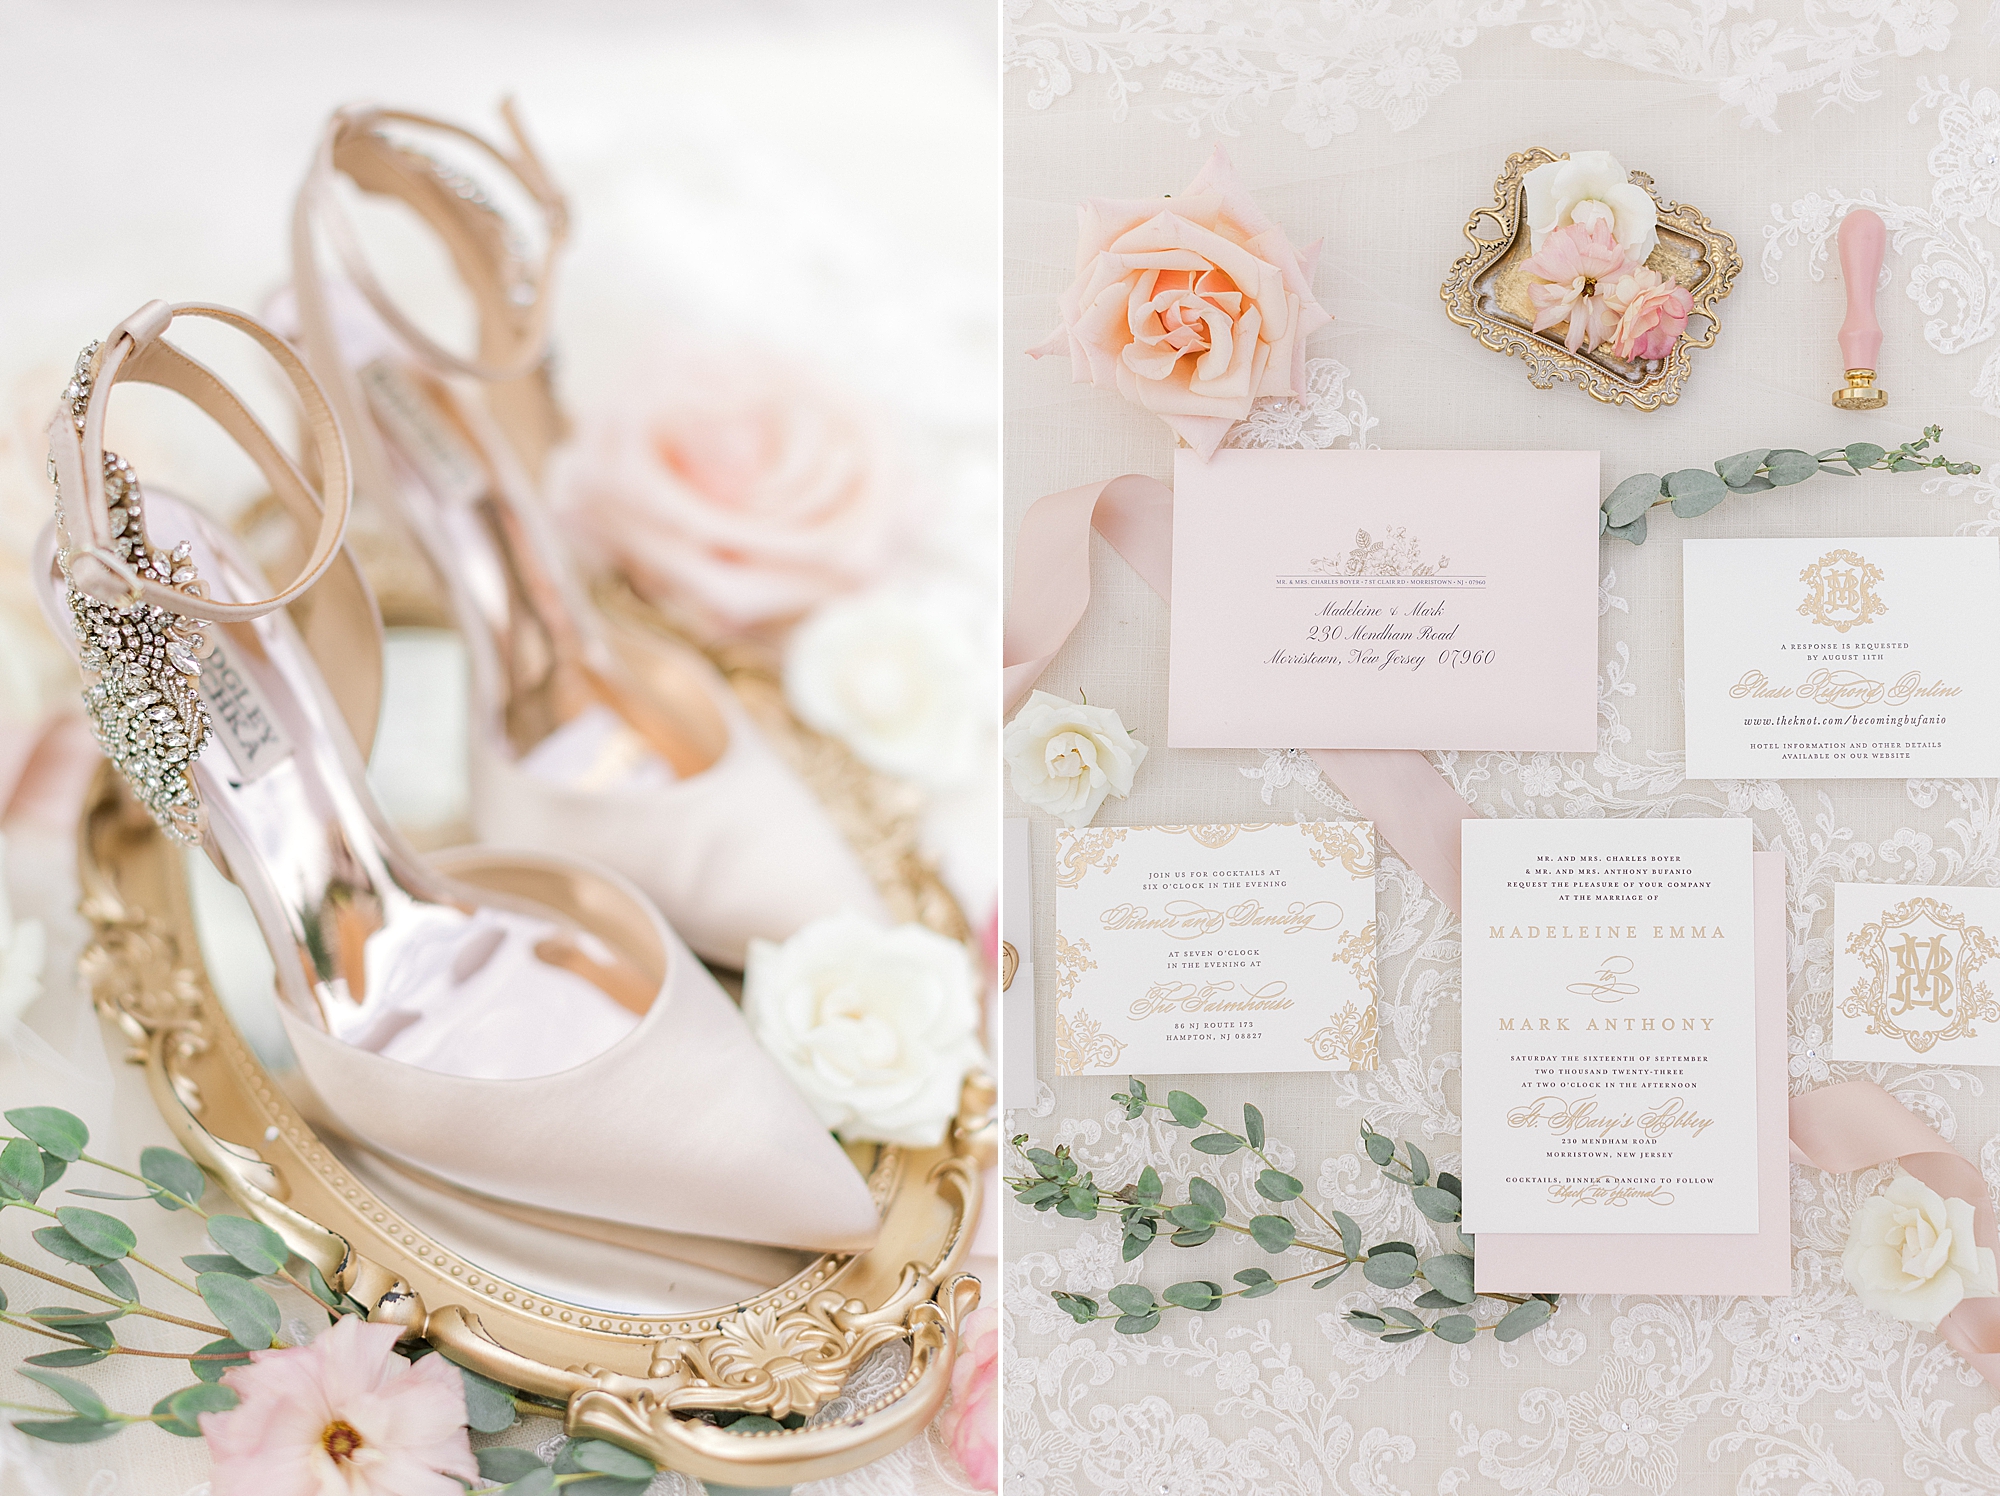 bride's ivory shoes on gold tray for NJ wedding day